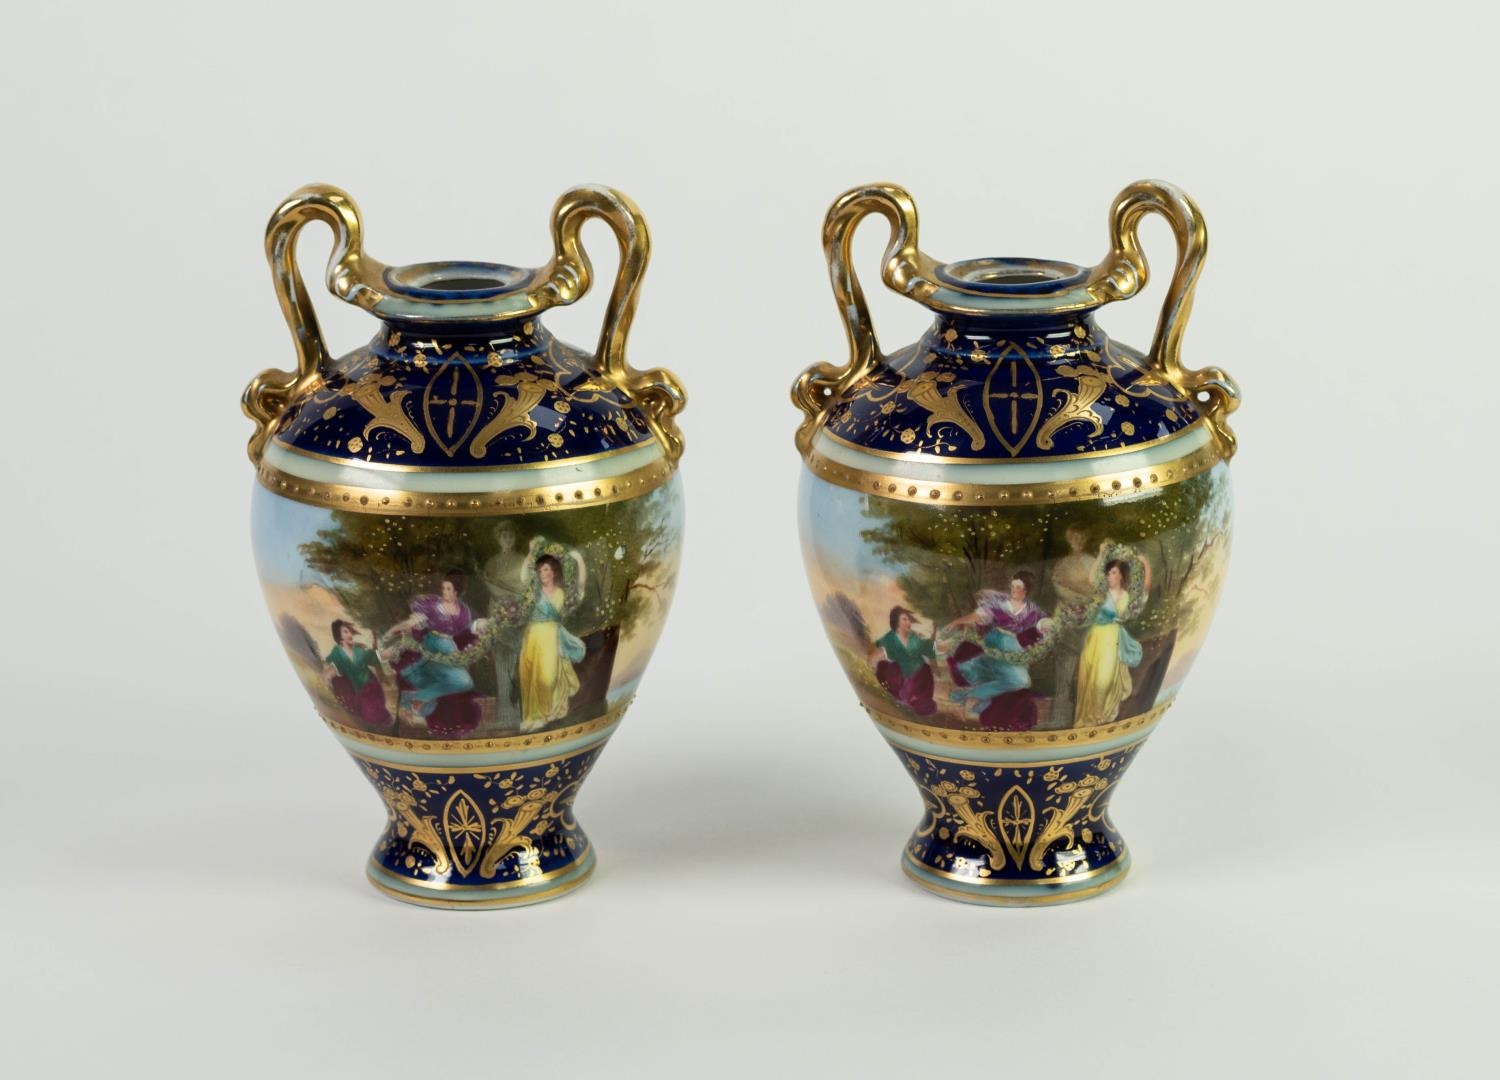 PAIR OF LATE NINETEENTH CENTURY AUSTRIAN PORCELAIN TWO HANDLED VASES, each of ovoid form with high